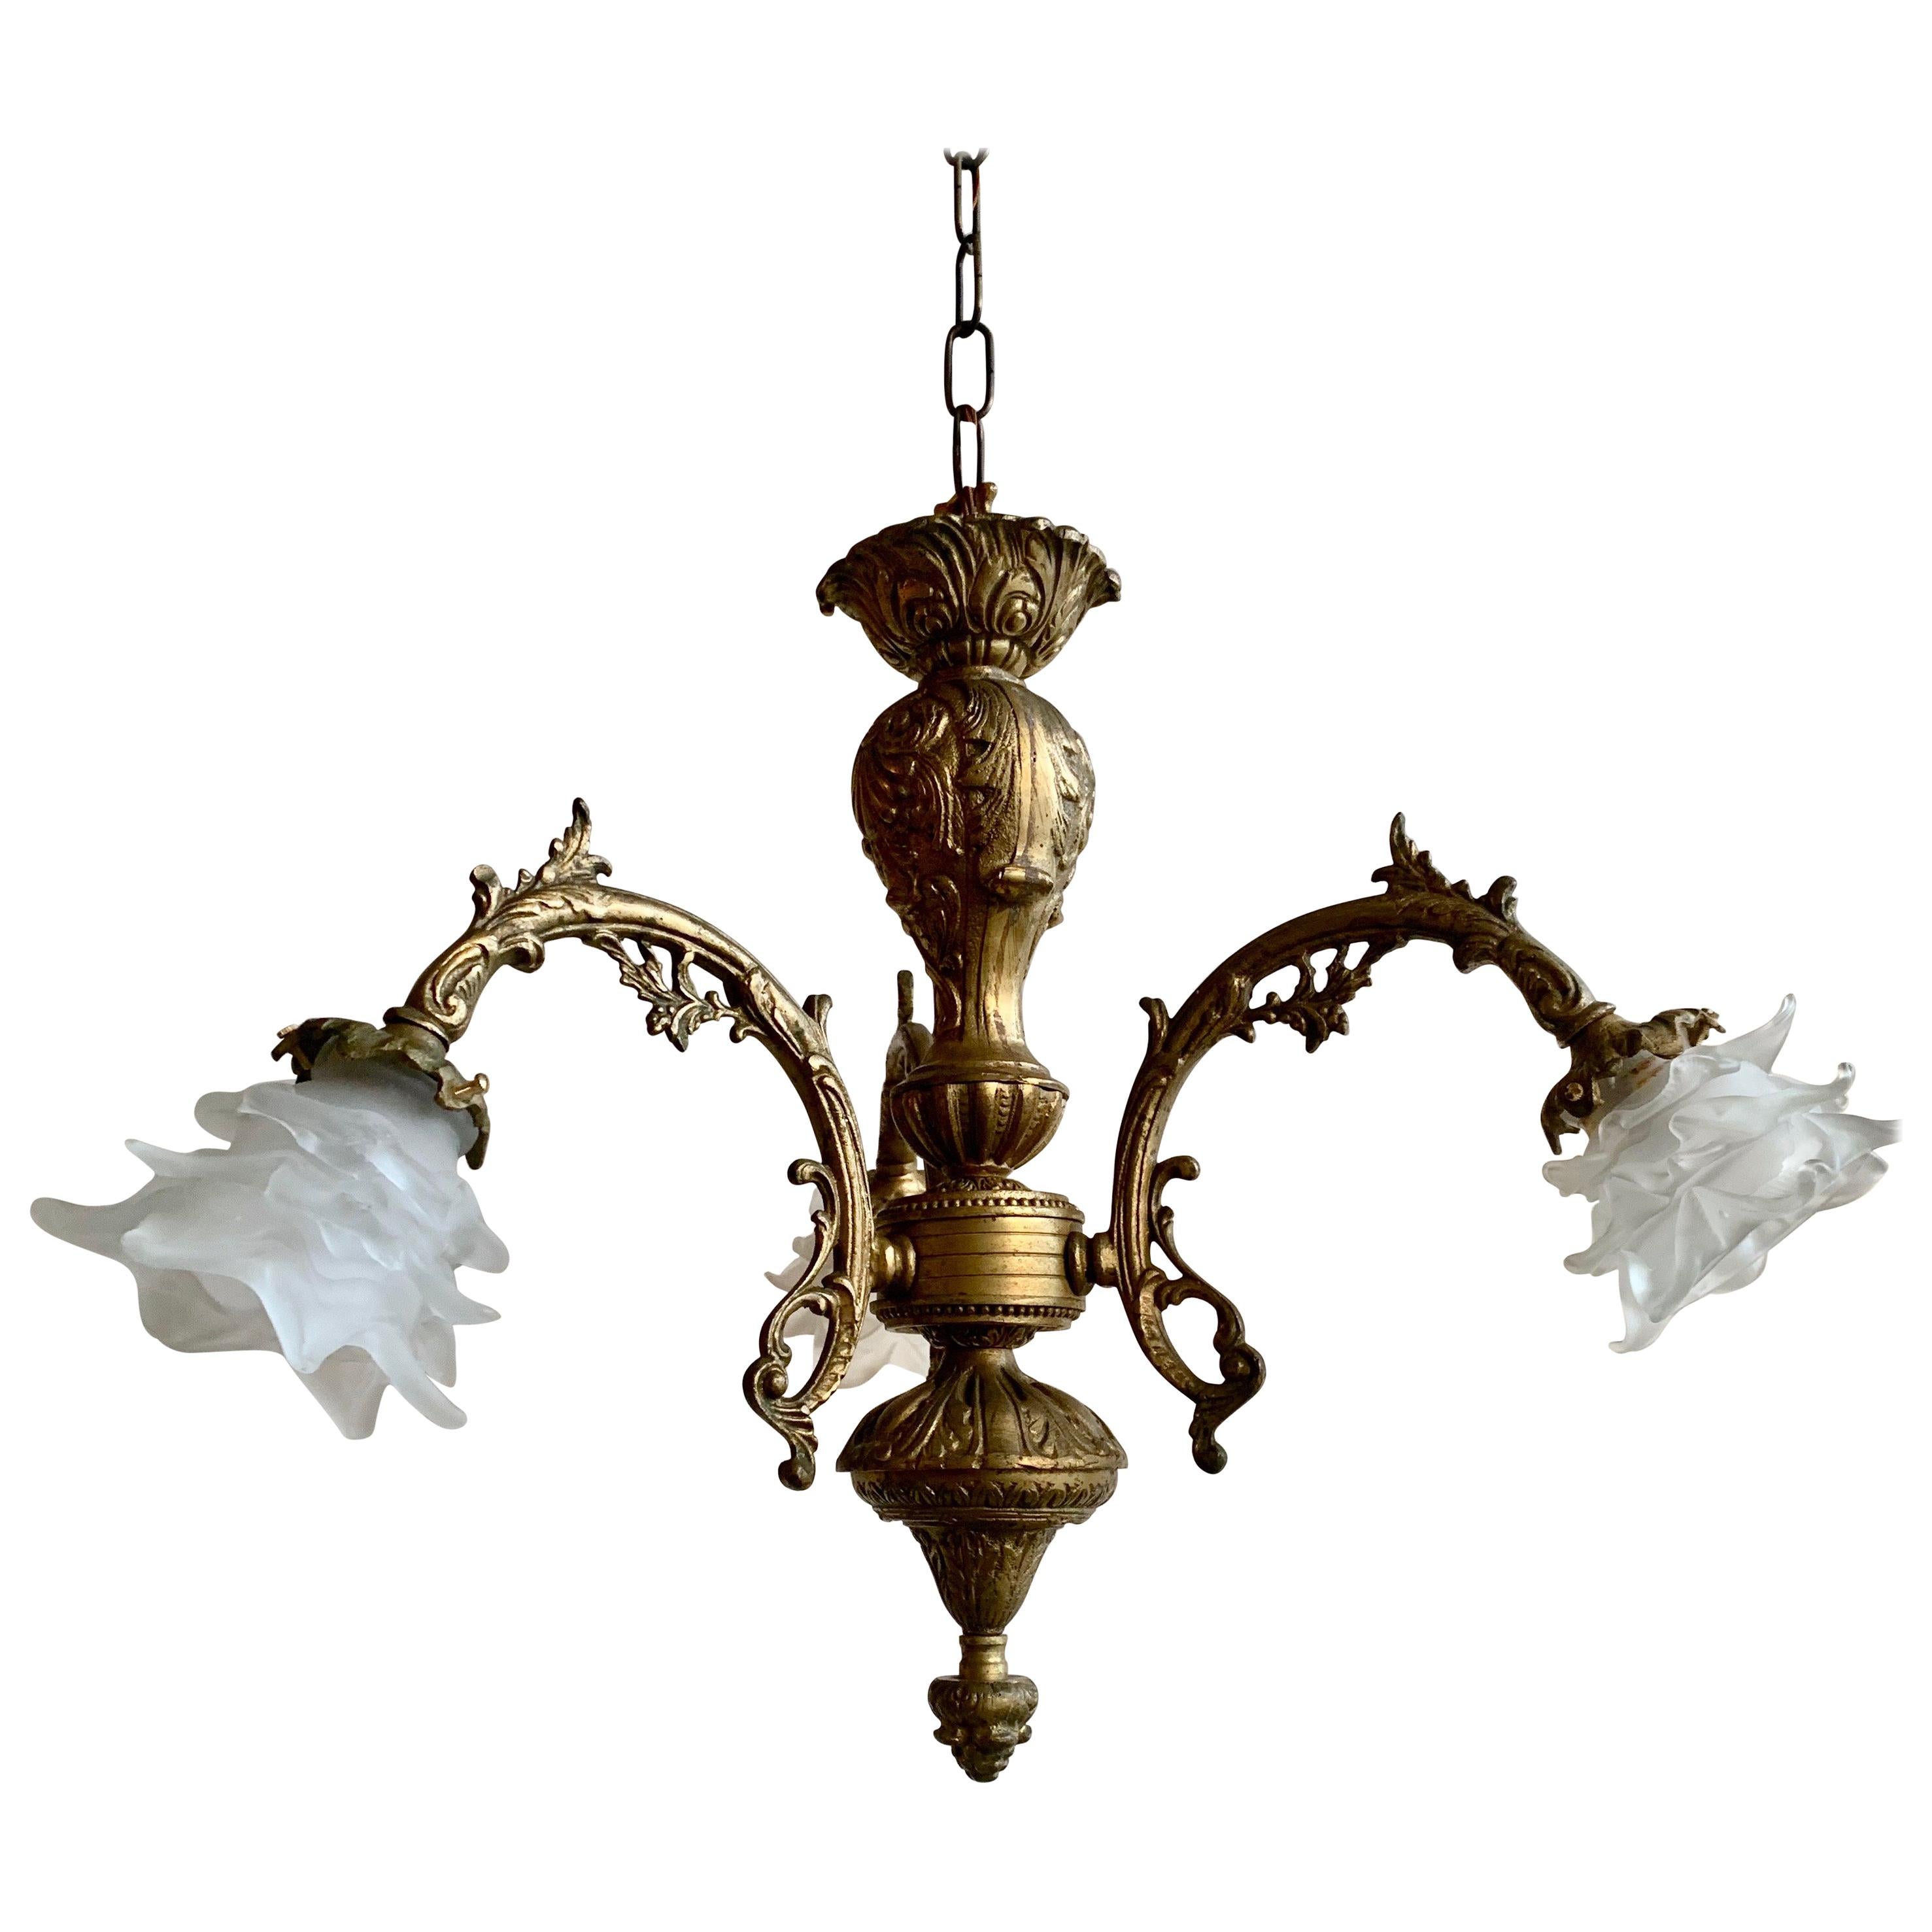  Ornate Downlighter With Floral Shades For Sale